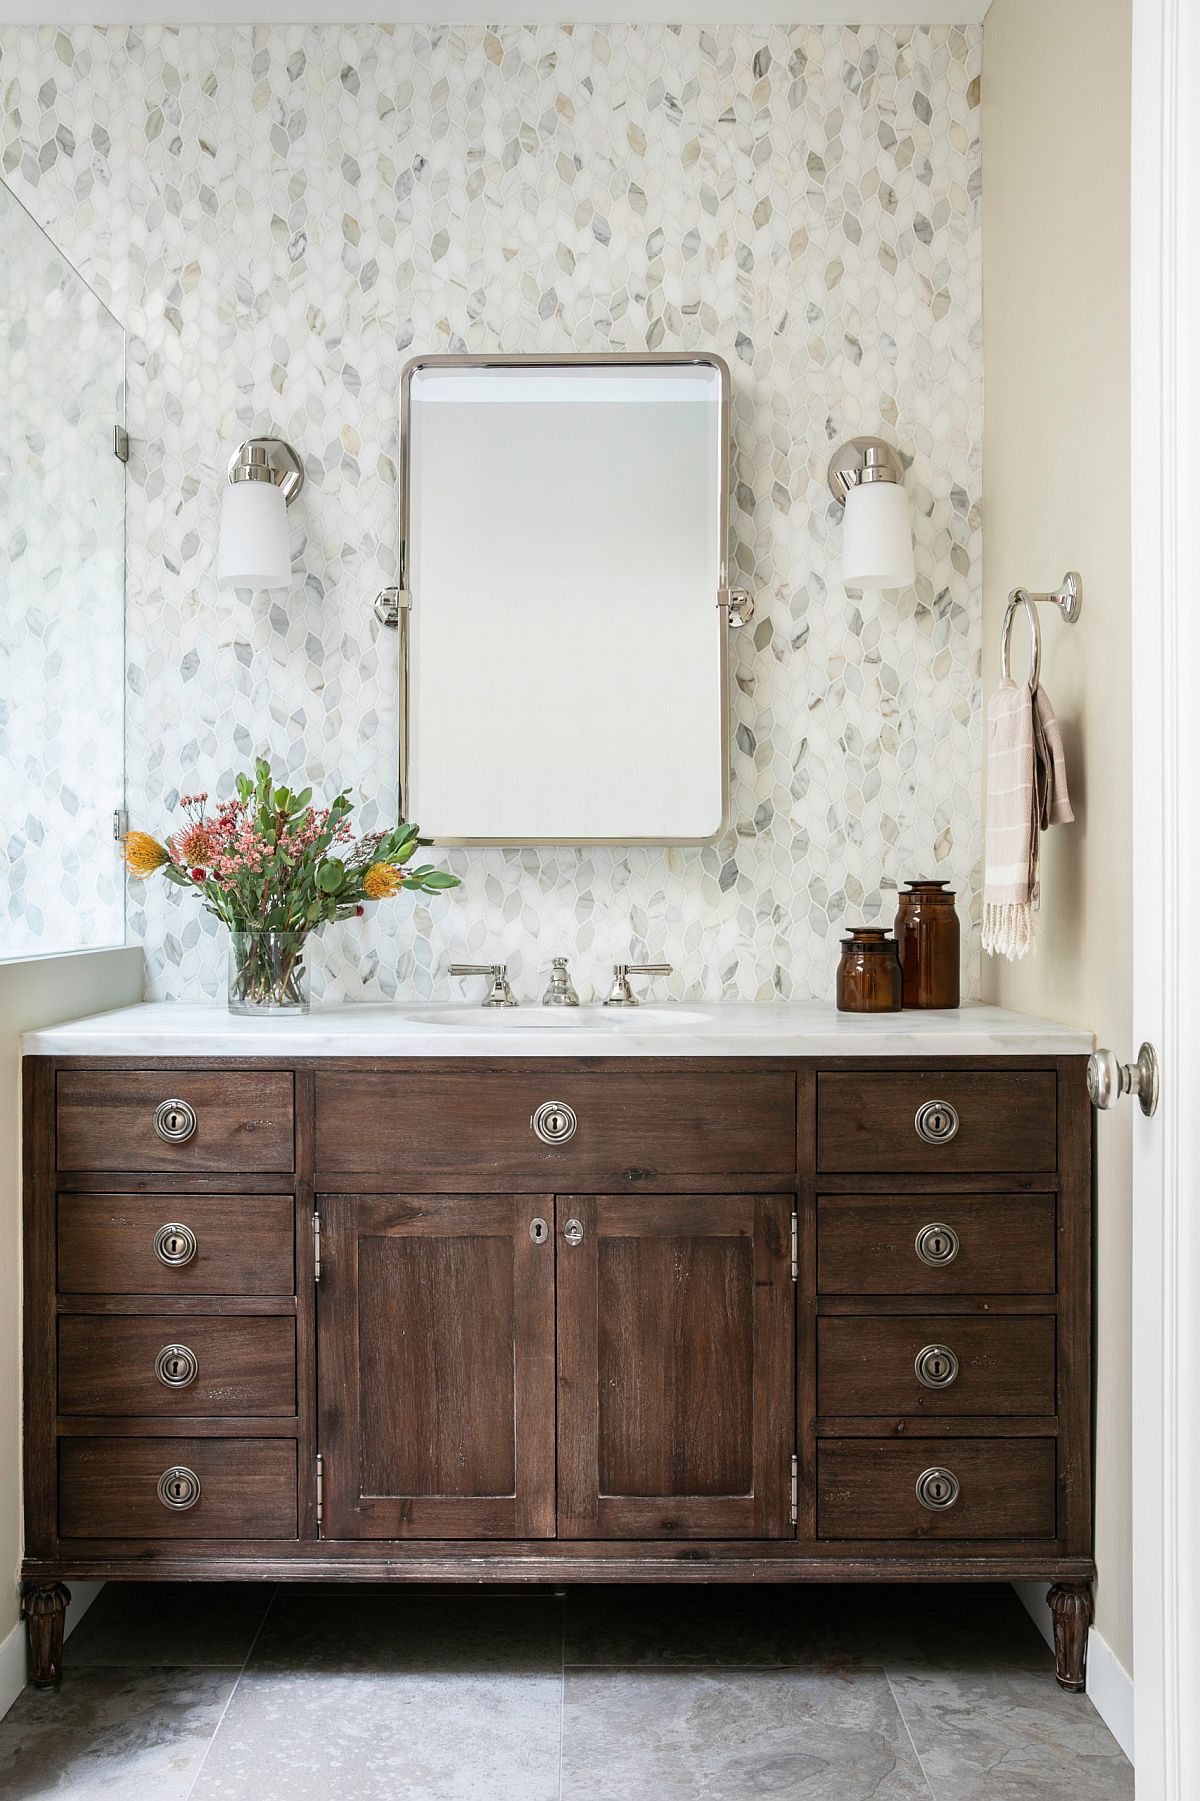 Traditional-bathroom-with-vanity-in-the-corner-and-a-beautiful-backsplash-73365